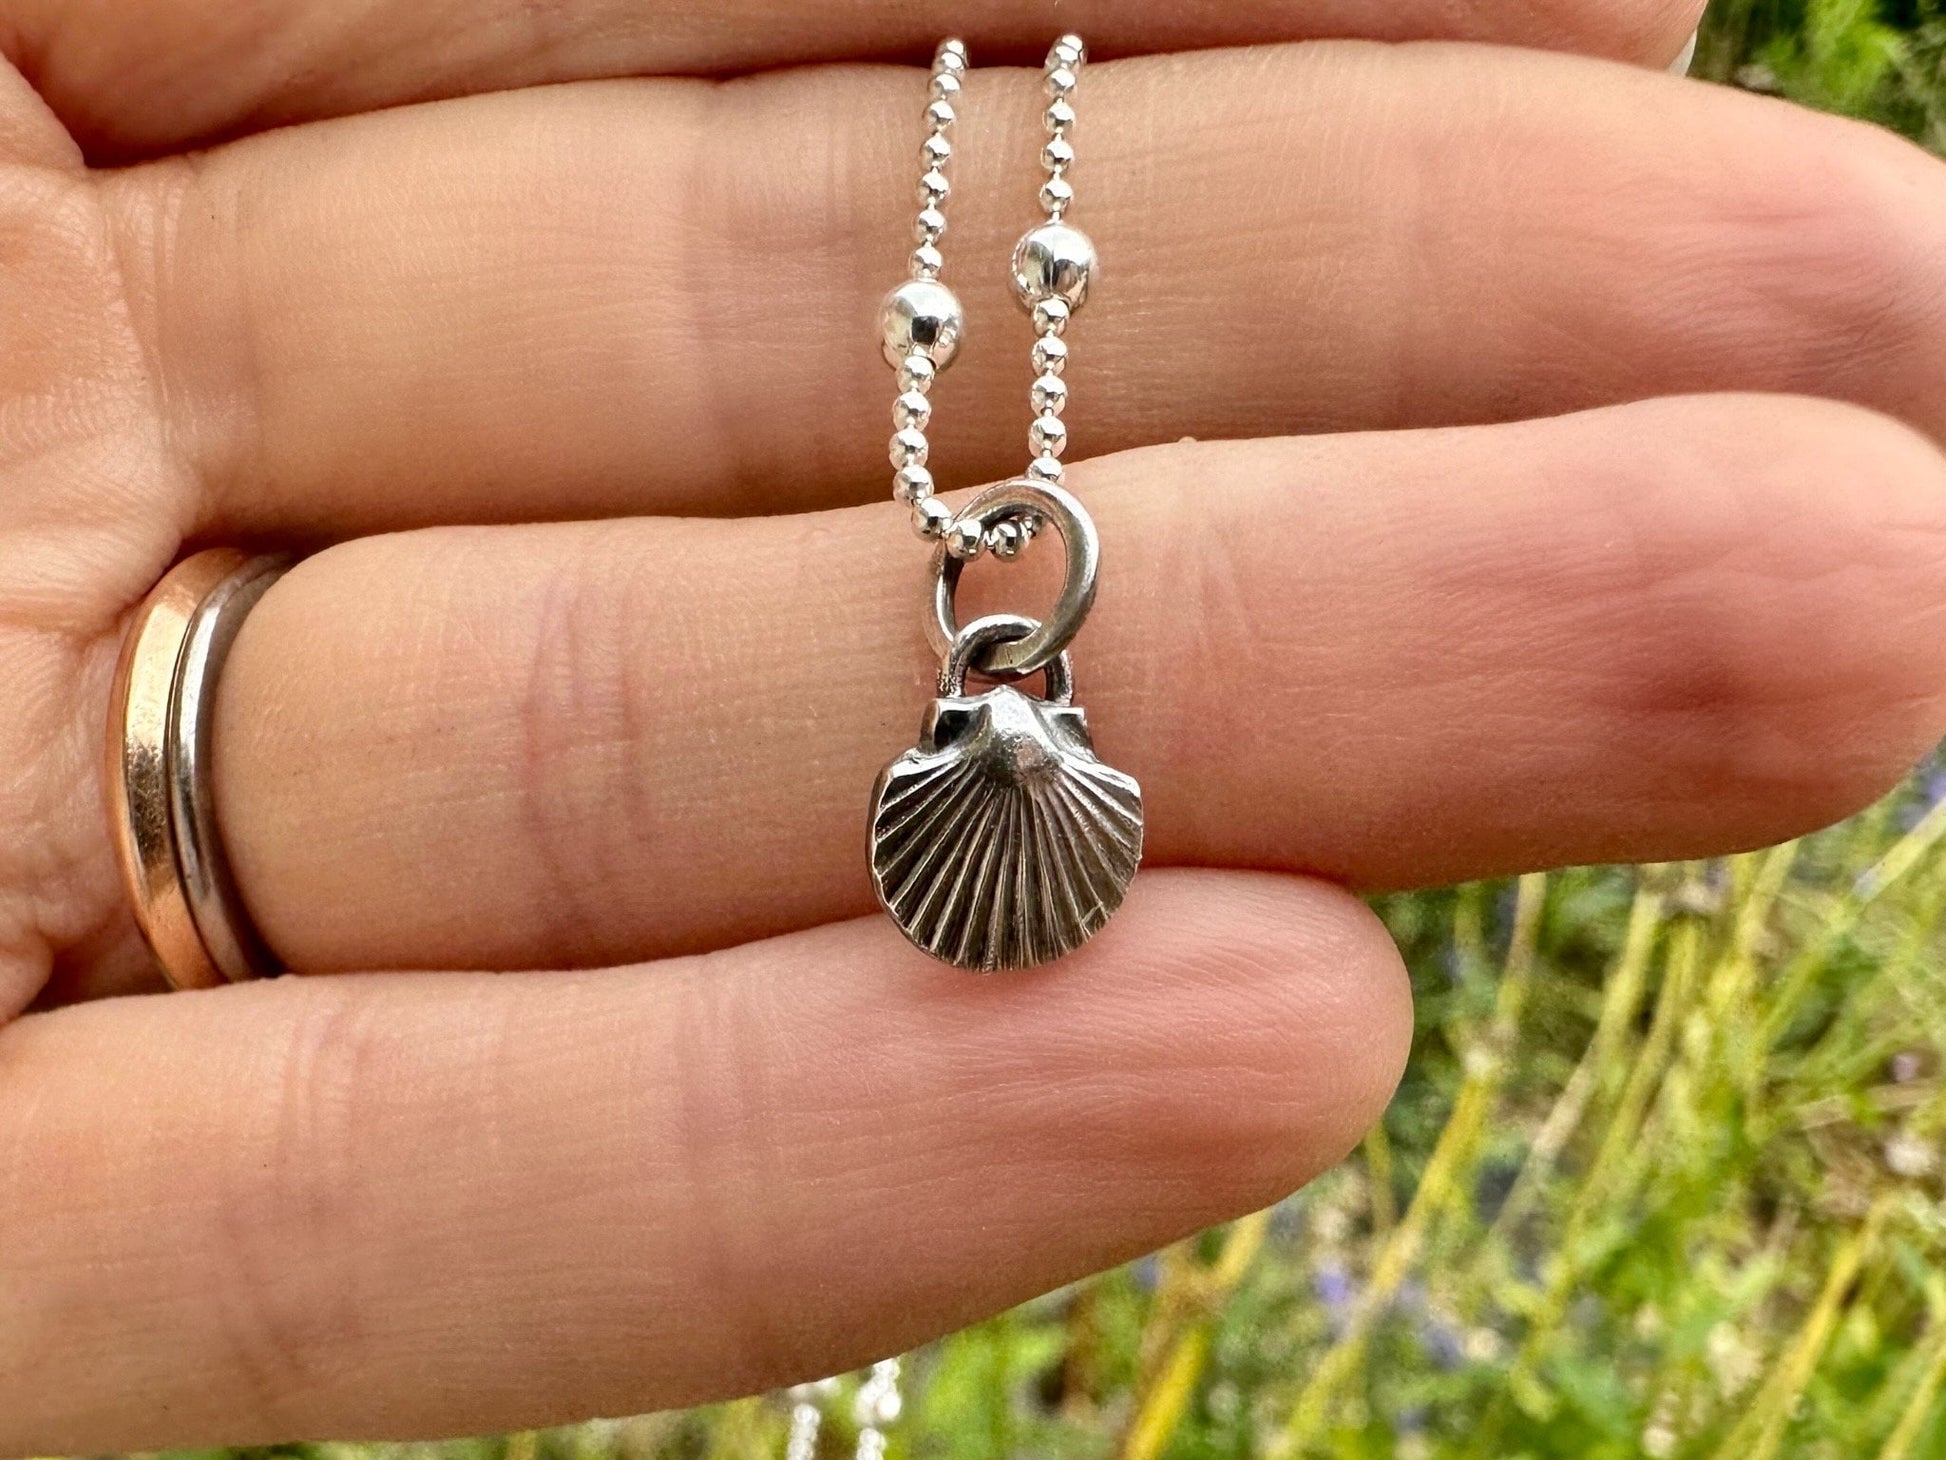 Rustic Sterling Silver Scallop Seashell pendant charm necklace, handmade from recycled 925 Sterling Silver, made to order